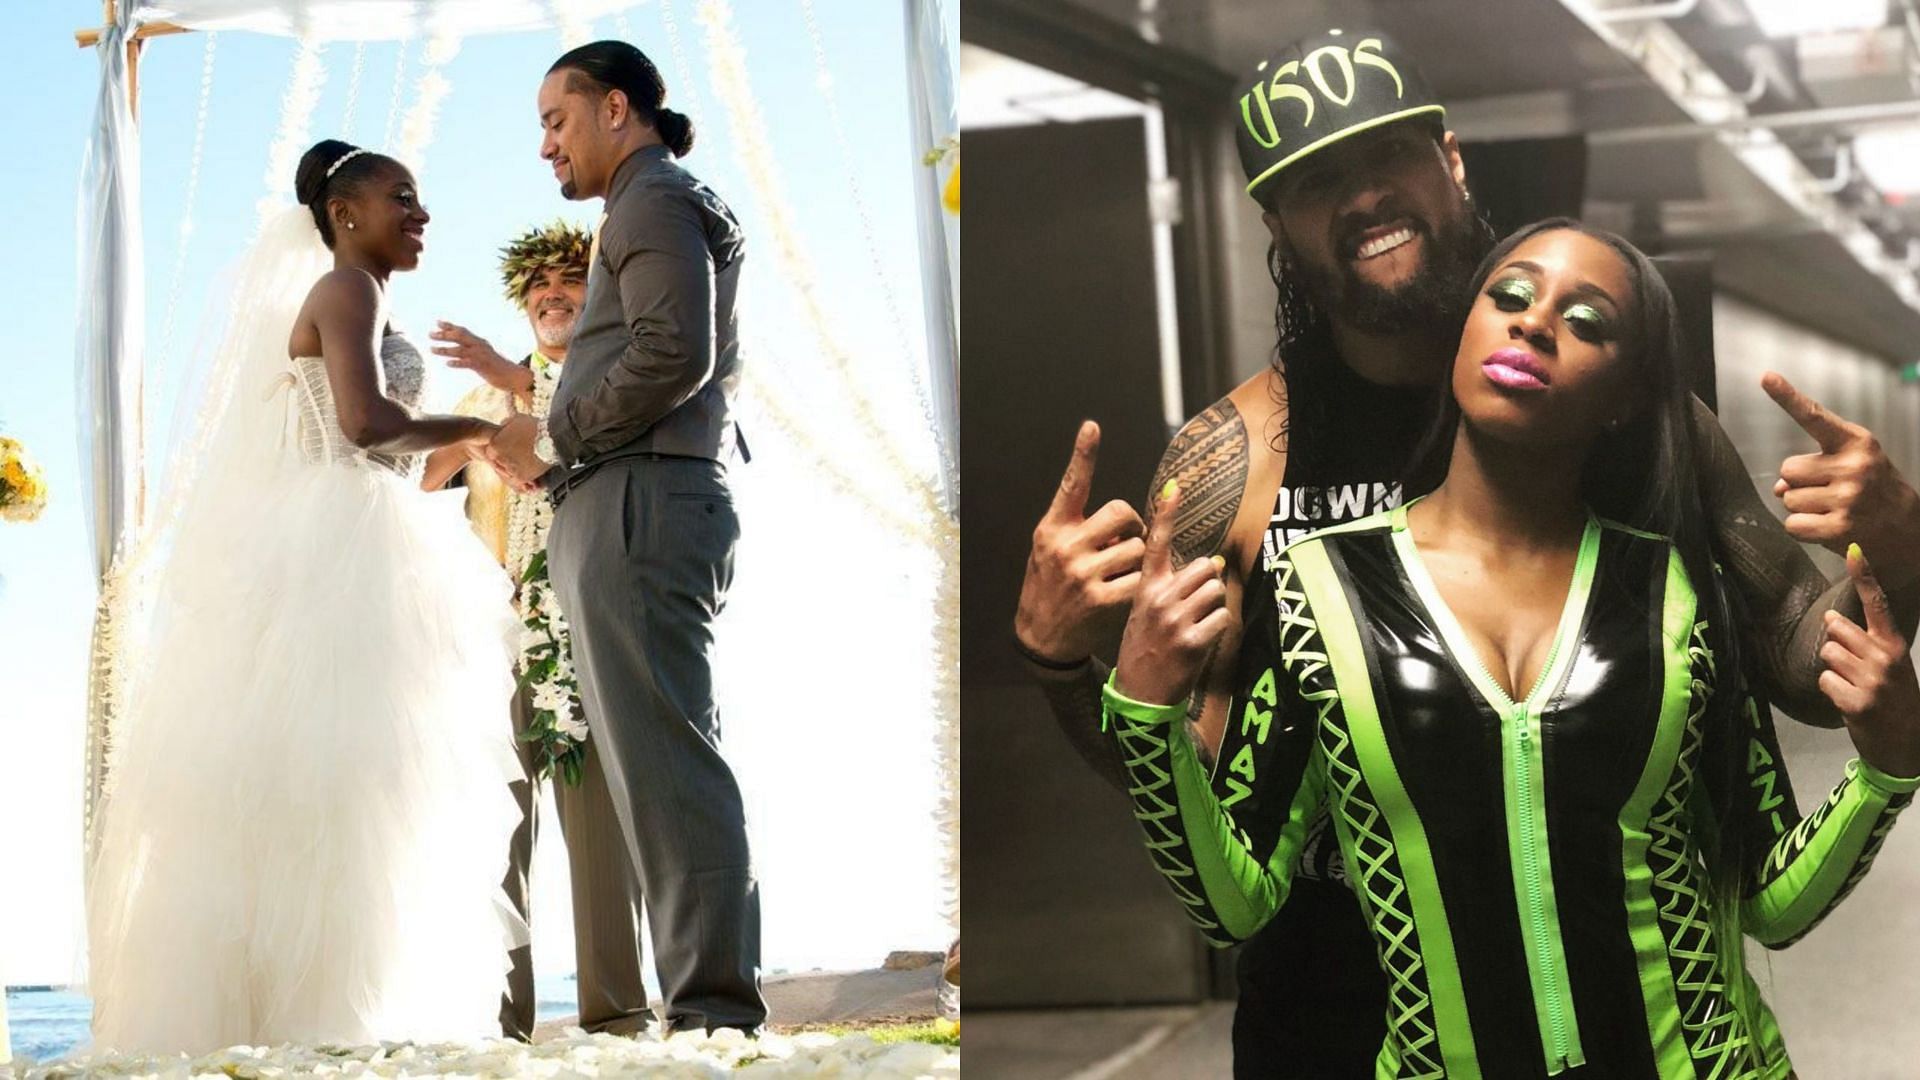 Jimmy Uso and Naomi joined WWE in 2009